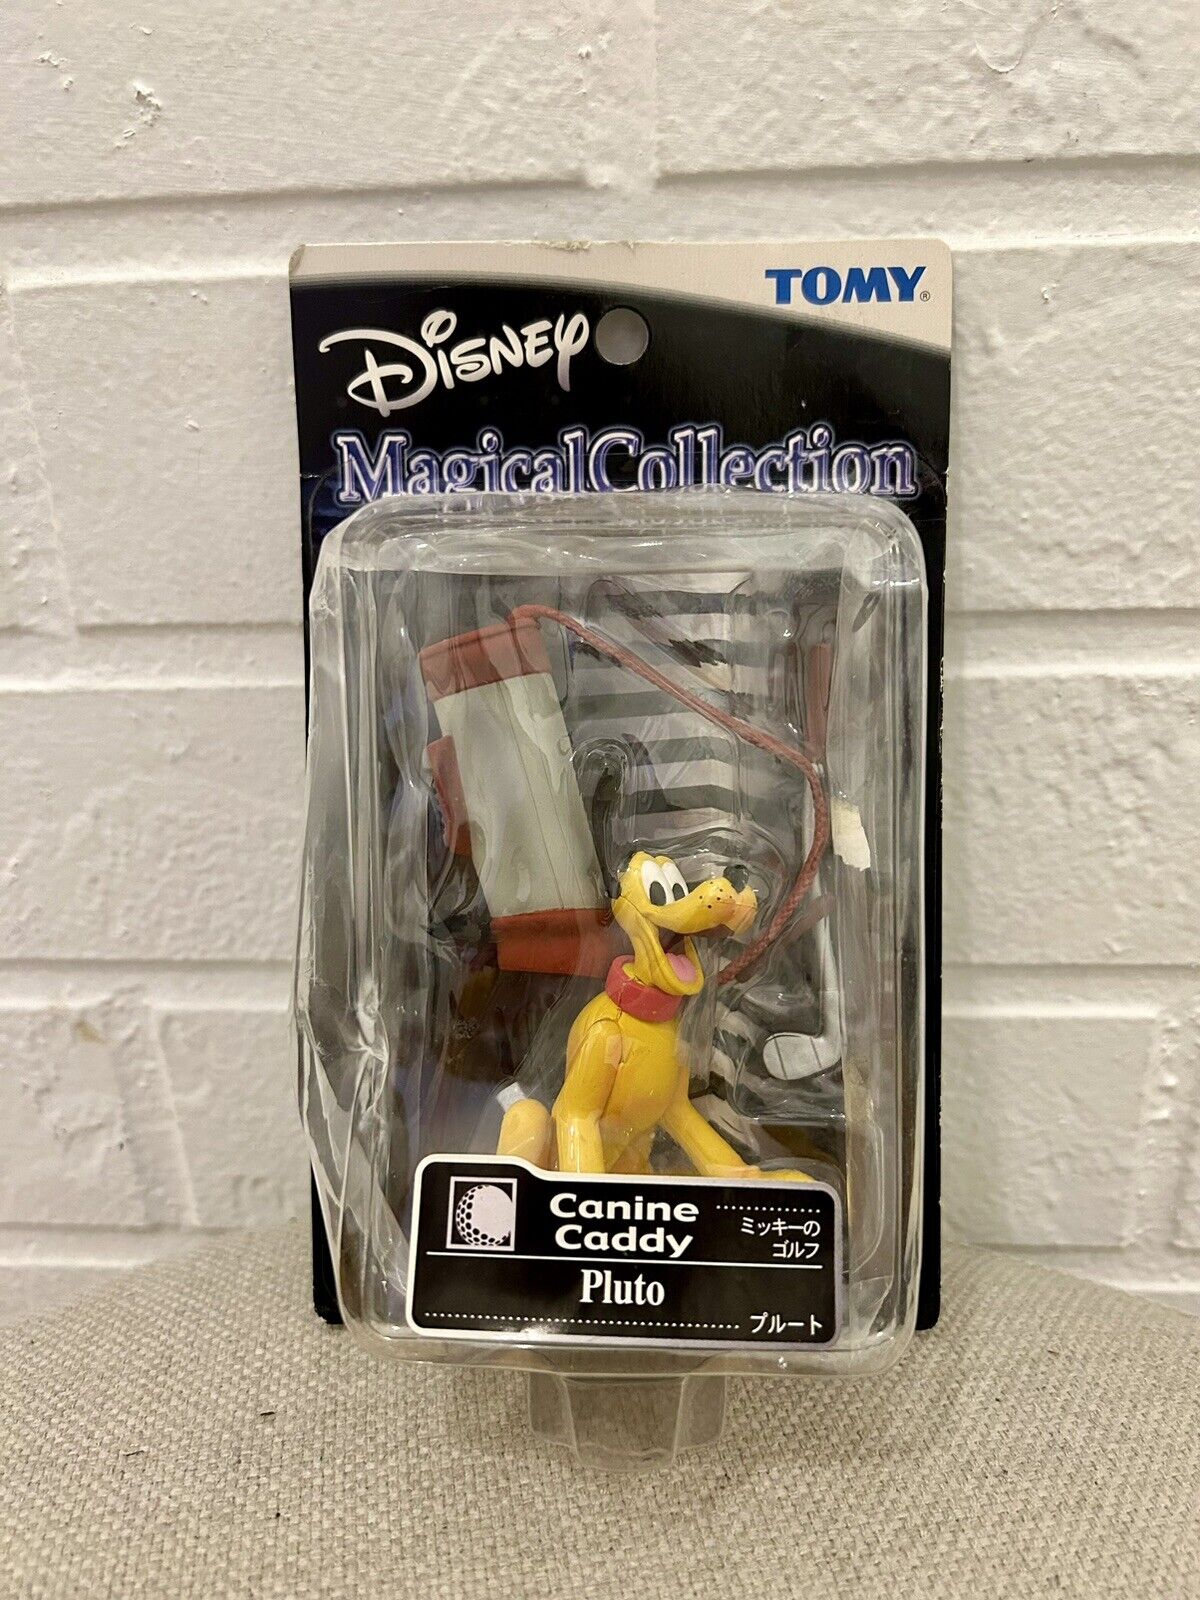 TOMY Disney Magical Collection Pluto (#39 Canine Caddy) Figurine NEW